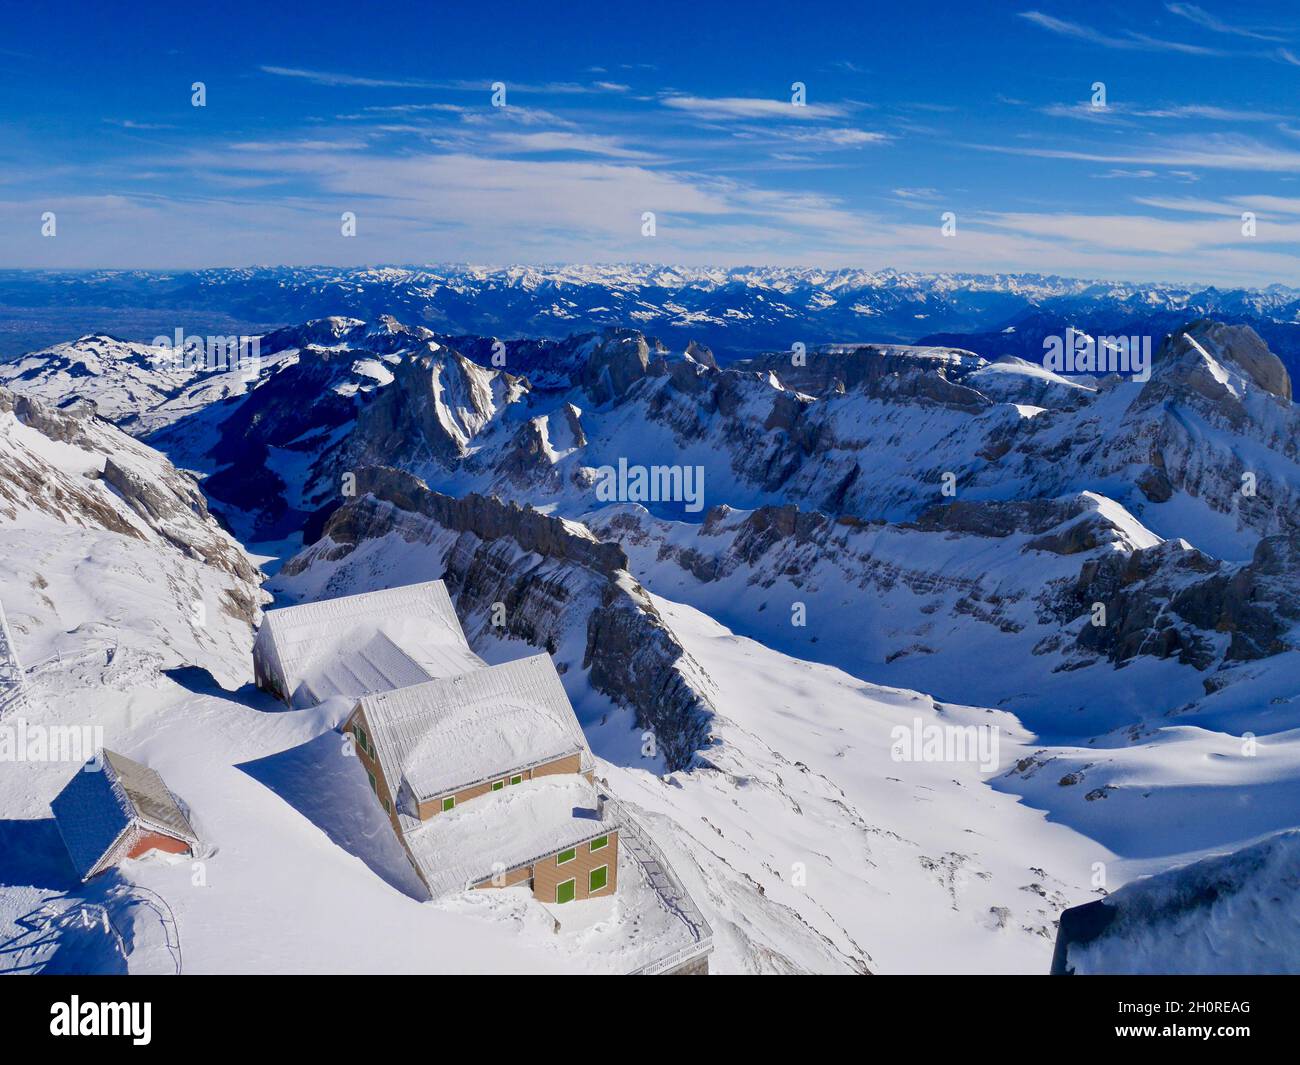 Spectacular view of Alpstein and Berggasthaus Alter Saentis seen from the mountain station of Saentis cable car. Appenzell, Switzerland. Stock Photo